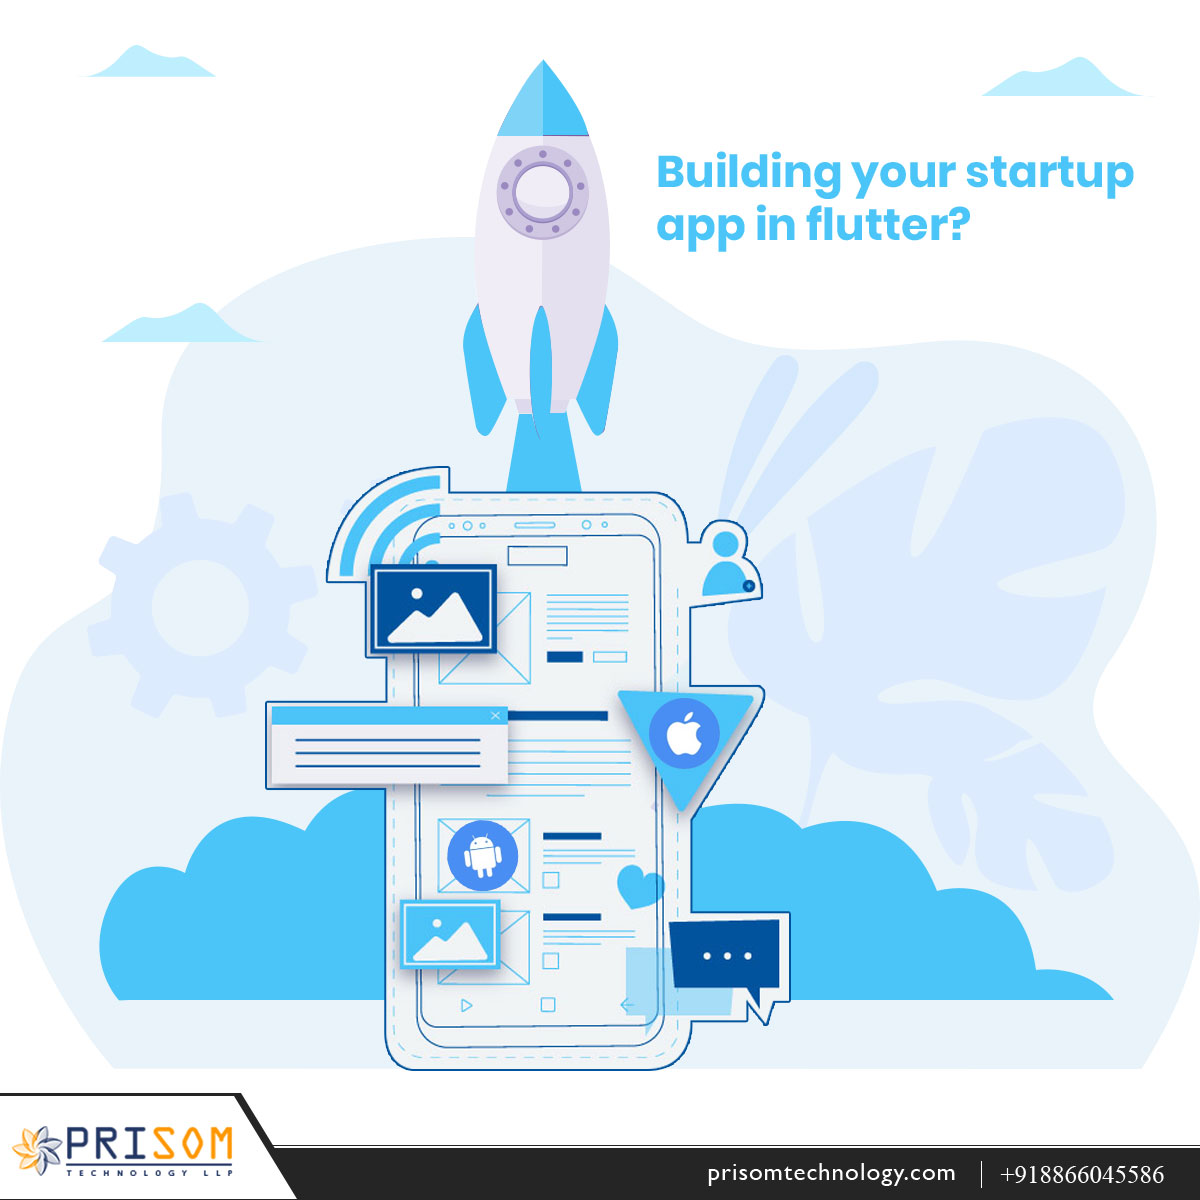 Build your #startup app in #flutter? Choose the right framework for your #mobileapp. We are here for you to select the proper framework for your #business #requirement.
#PrisomTechnology #hybridapp #nativeapp #appdevelopment #customsoftwaredevelopment